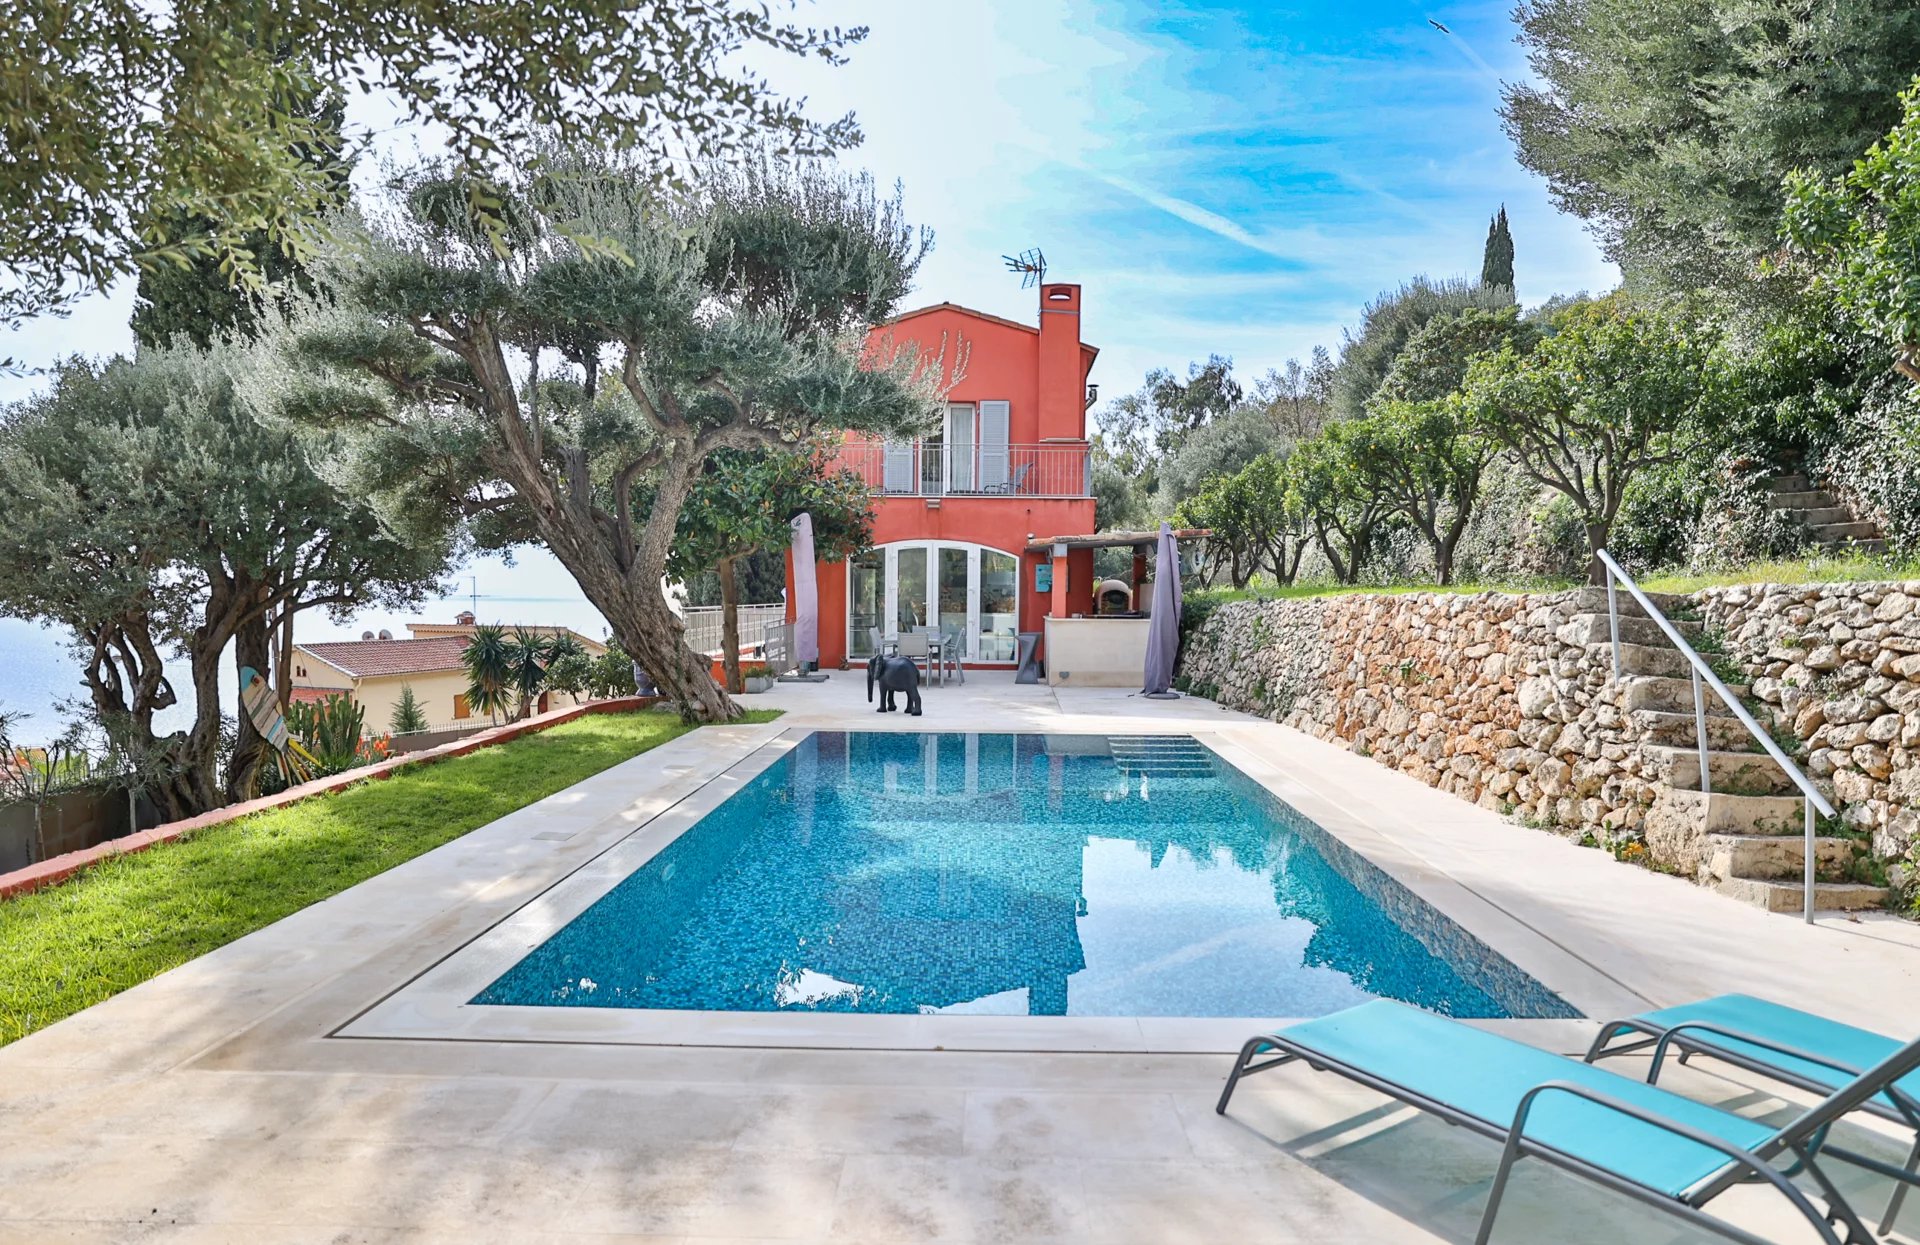 HOUSE FOR SALE IN CAP D'AIL - SEA VIEW - POOL - VERY CLOSE TO MONACO